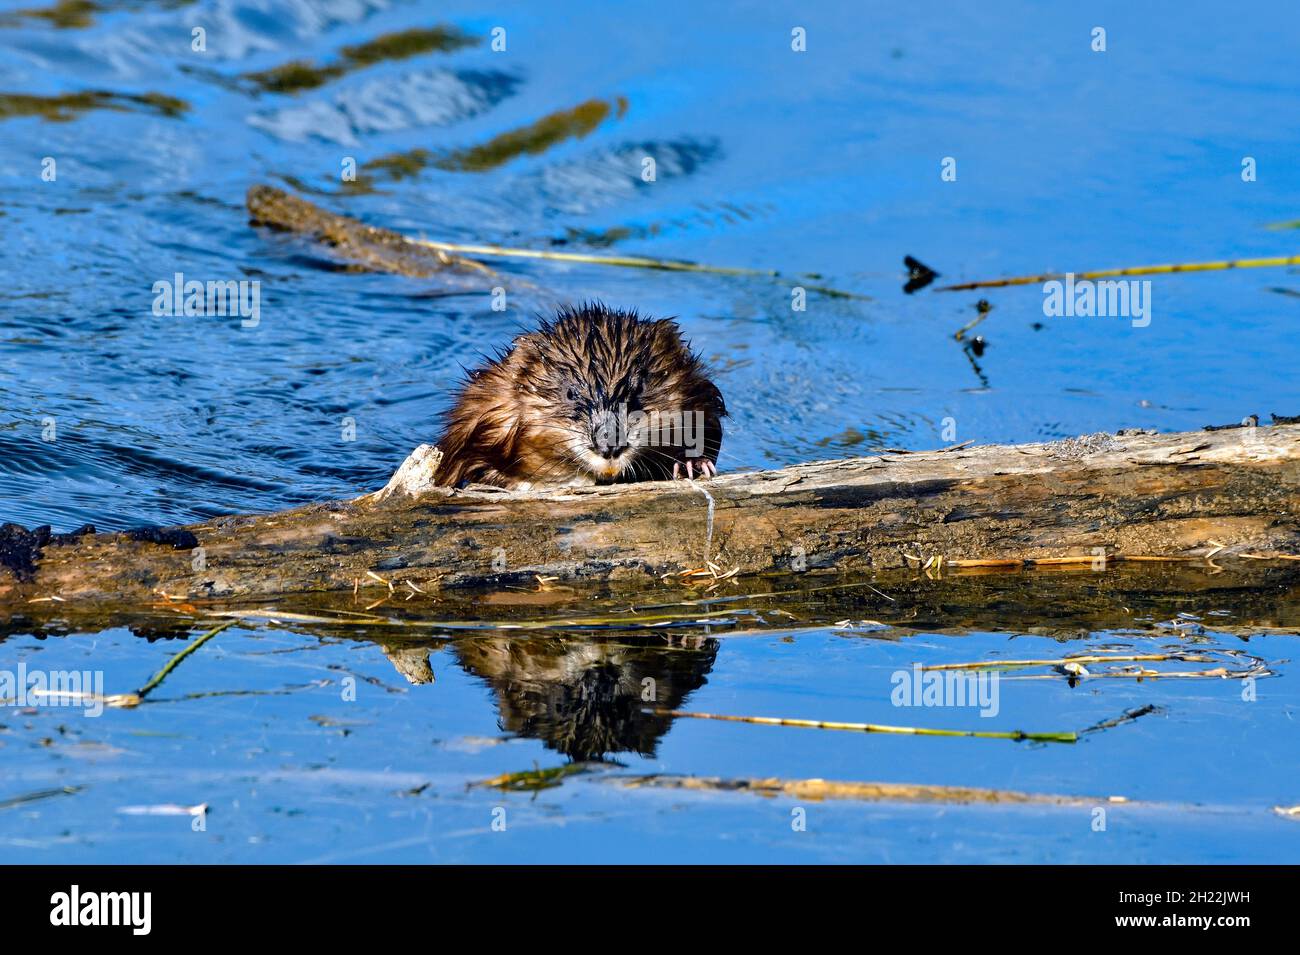 A front view of a wild Muskrat ' Ondatra zibethicus' climbing out of the water on a sunken tree in a beaver pond in rural Alberta Canada Stock Photo